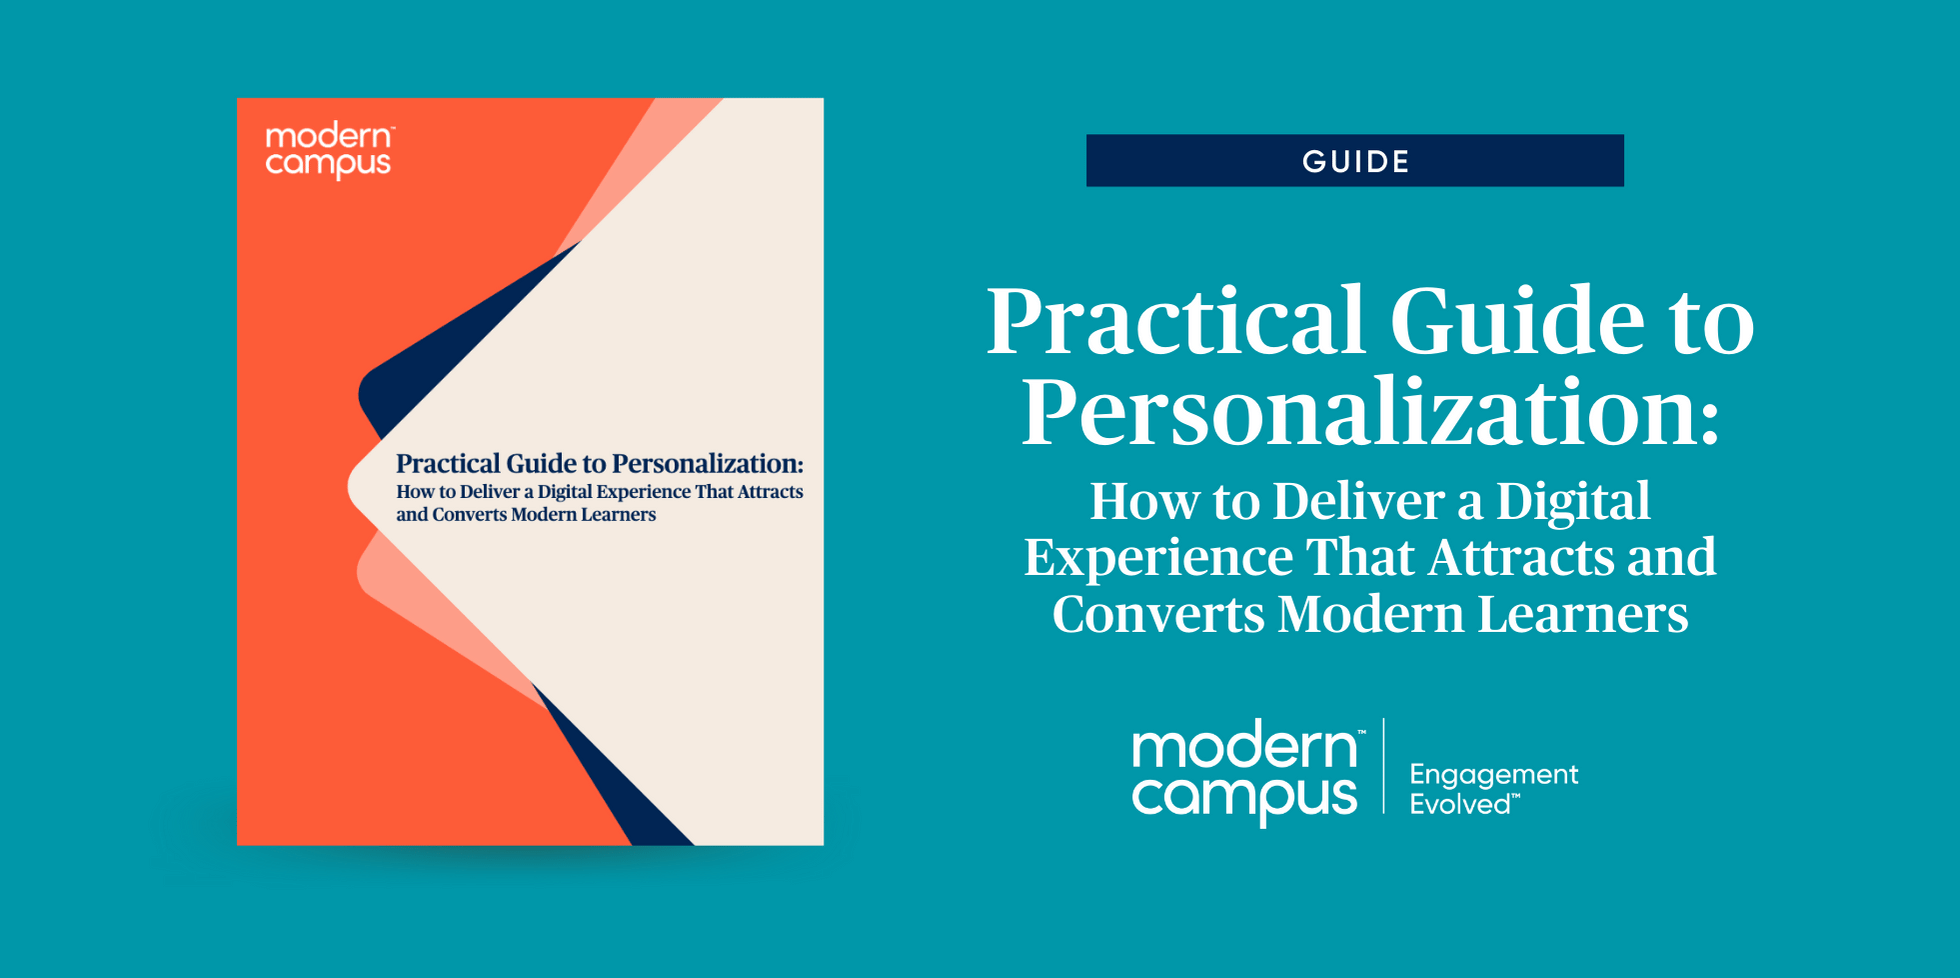 Practical Guide to Personalization: How to Deliver a Digital Experience That Attracts and Converts Modern Learners